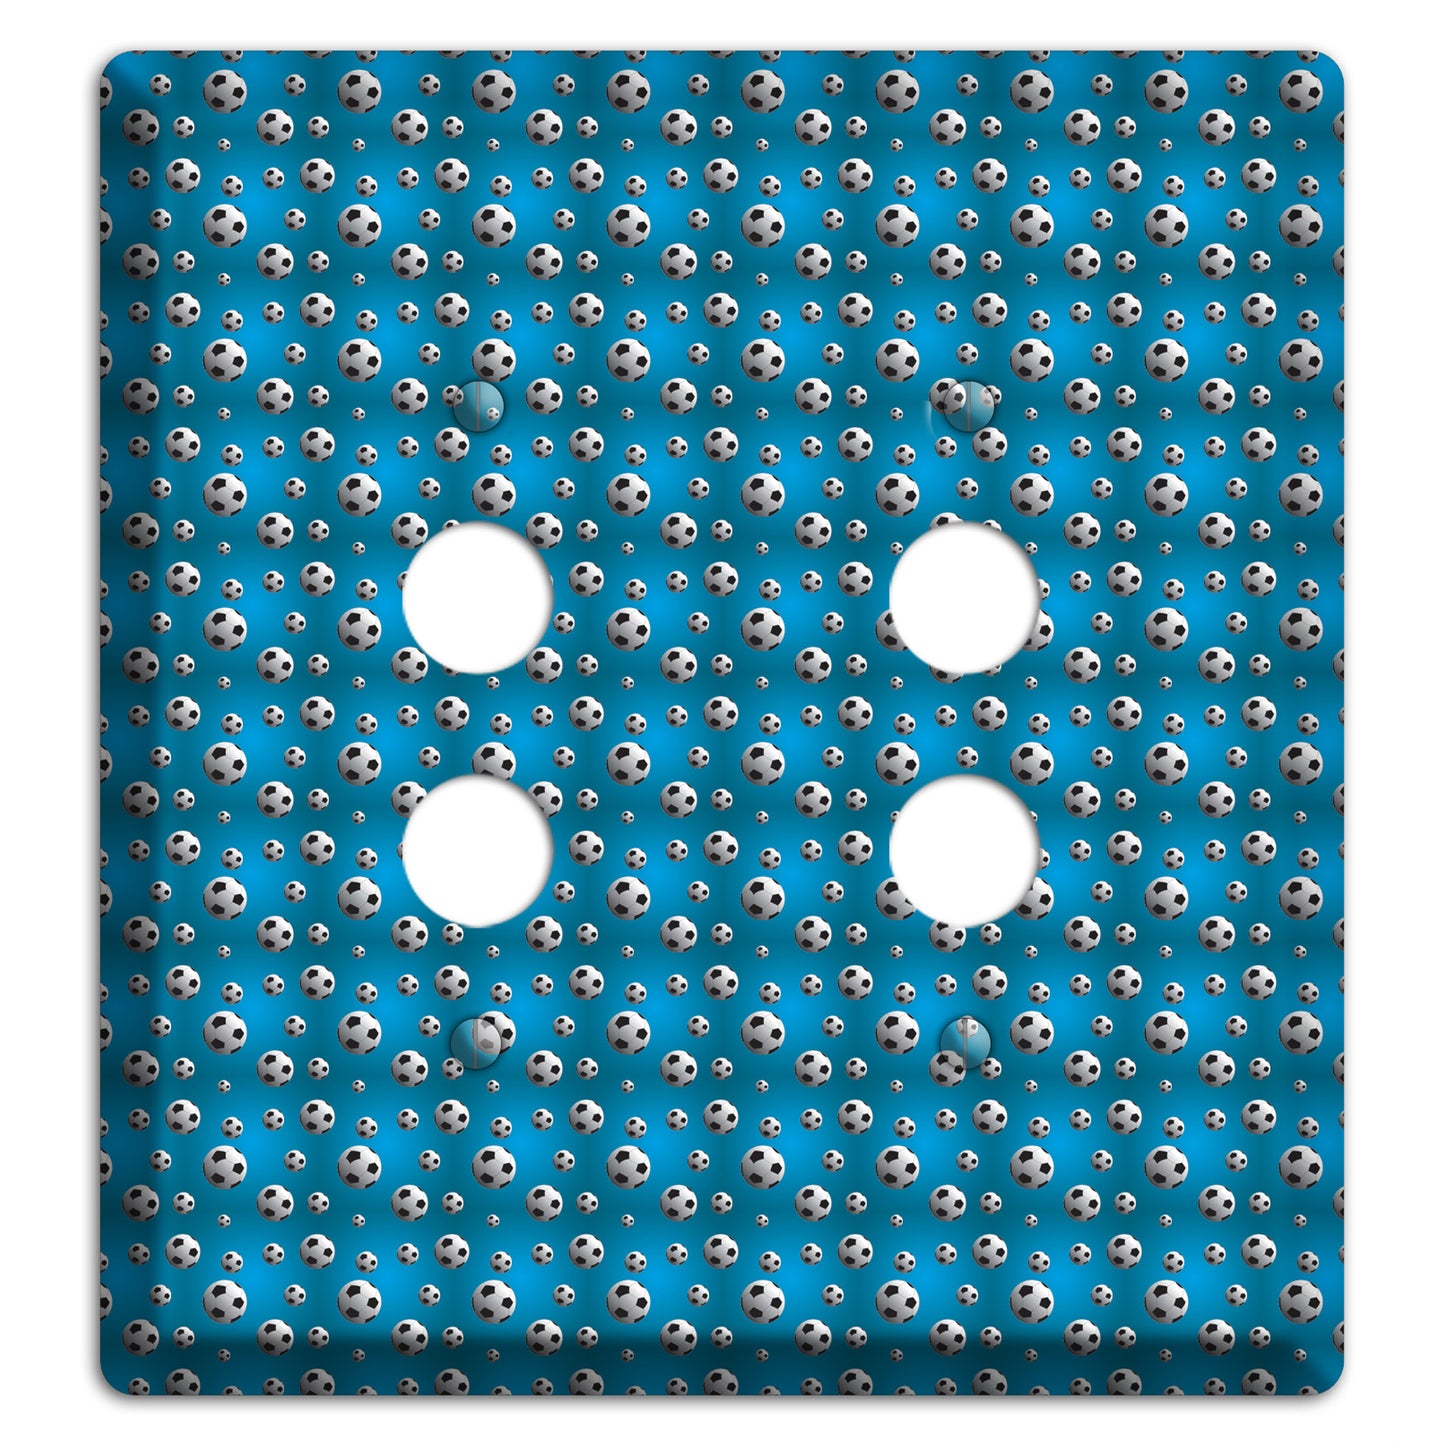 Blue with Soccer Balls 2 Pushbutton Wallplate